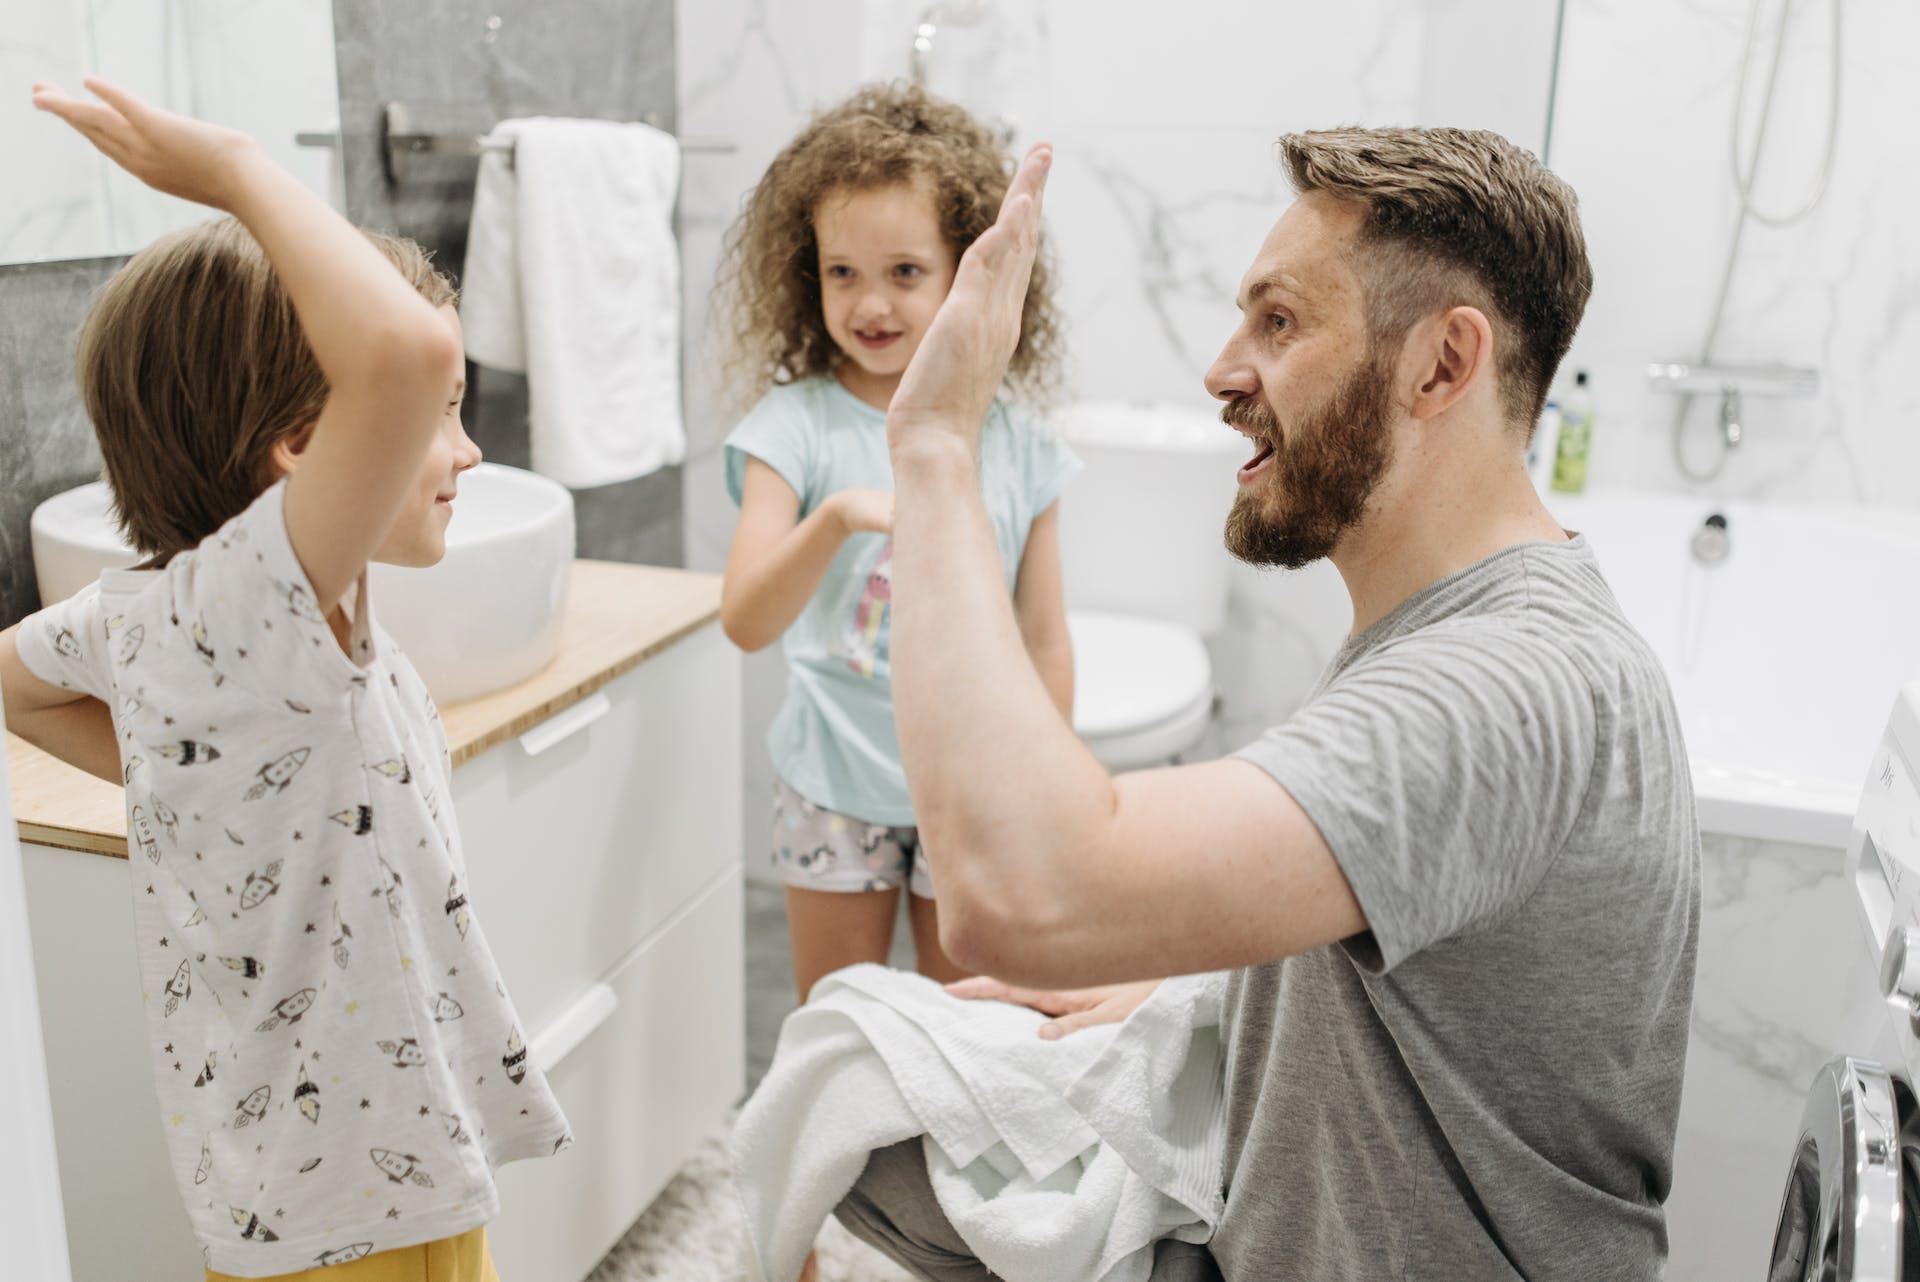 Man giving a high five to children | Source: Pexels